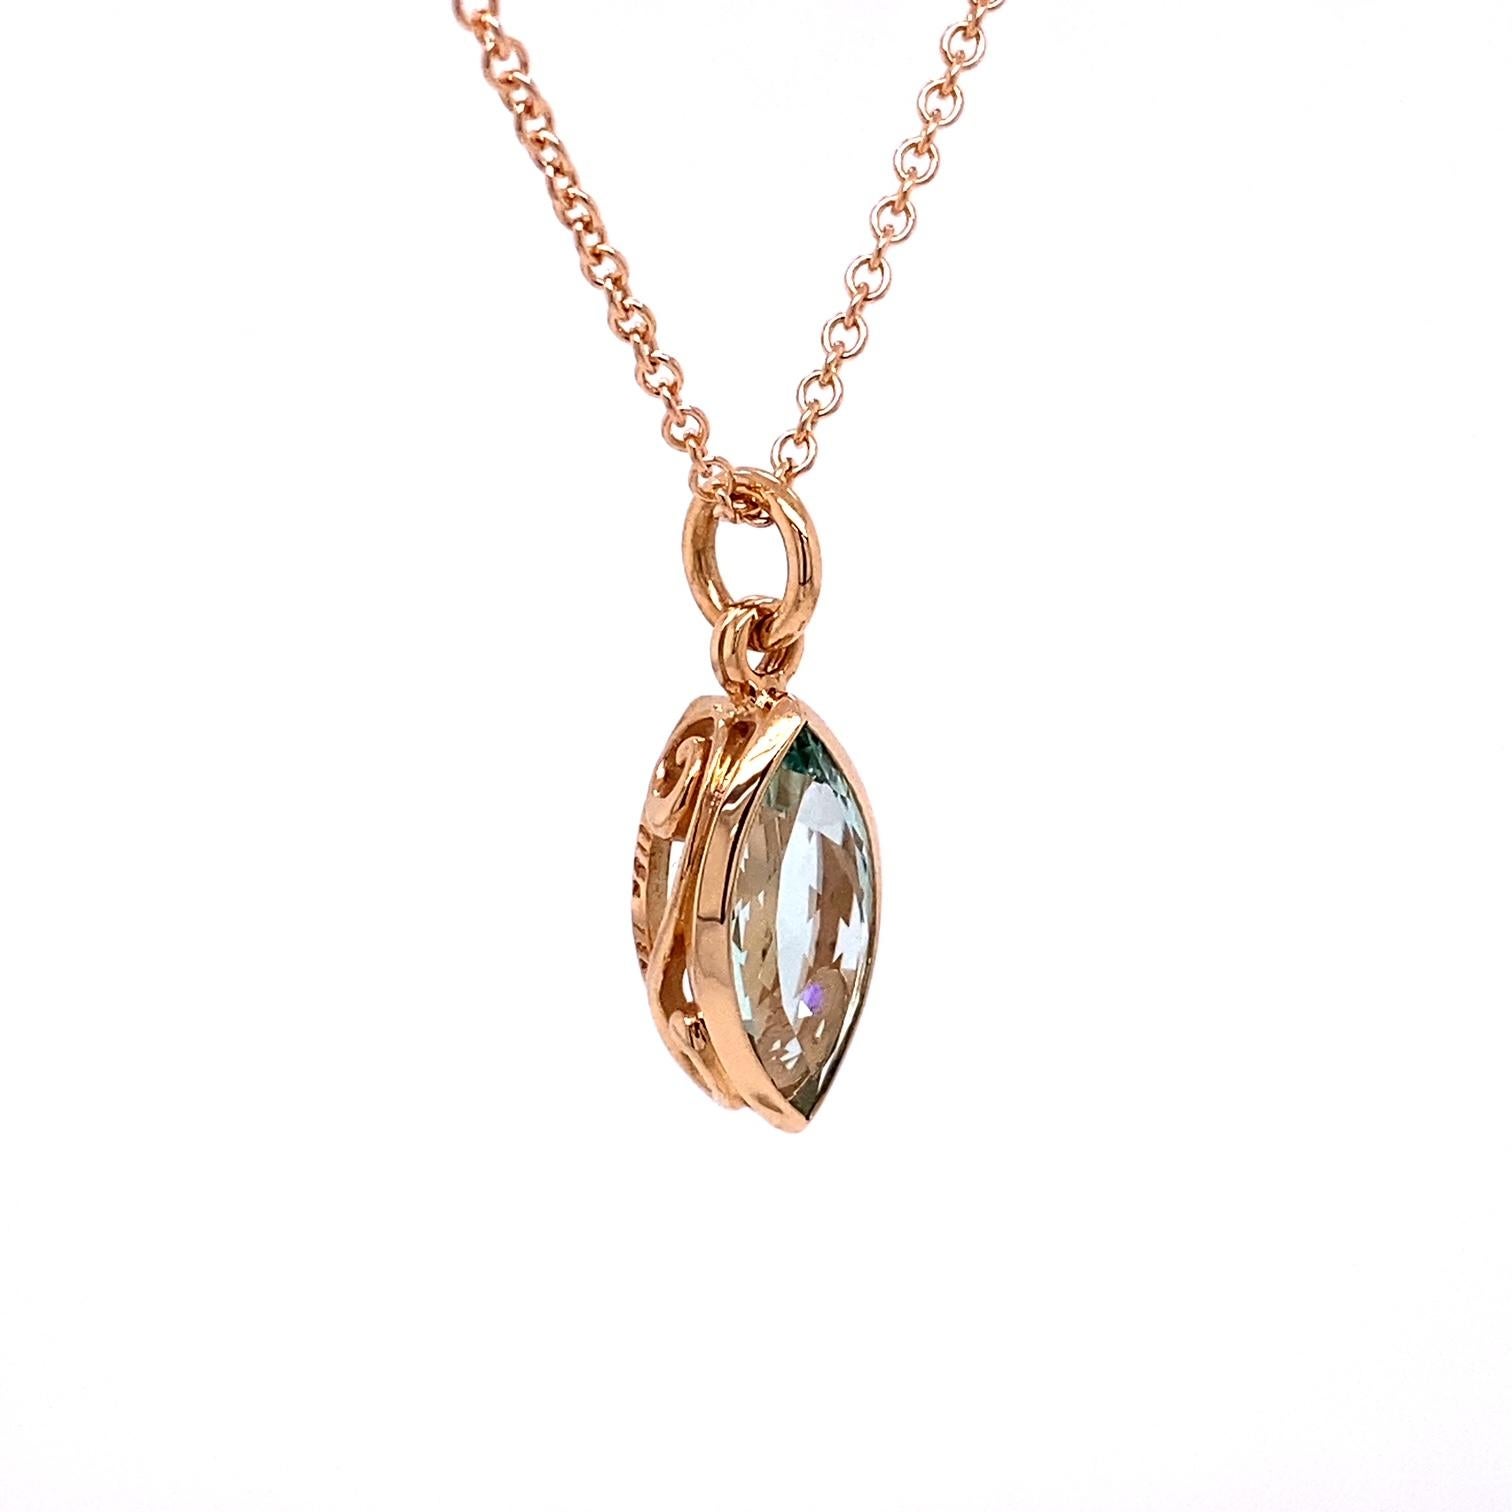 An 18k rose gold pendant featuring one bezel set 2.09 carat marquise shaped green beryl on a 16 inch 1.5mm 14k rose gold cable chain. This pendant was custom designed and made by Sydney Strong.